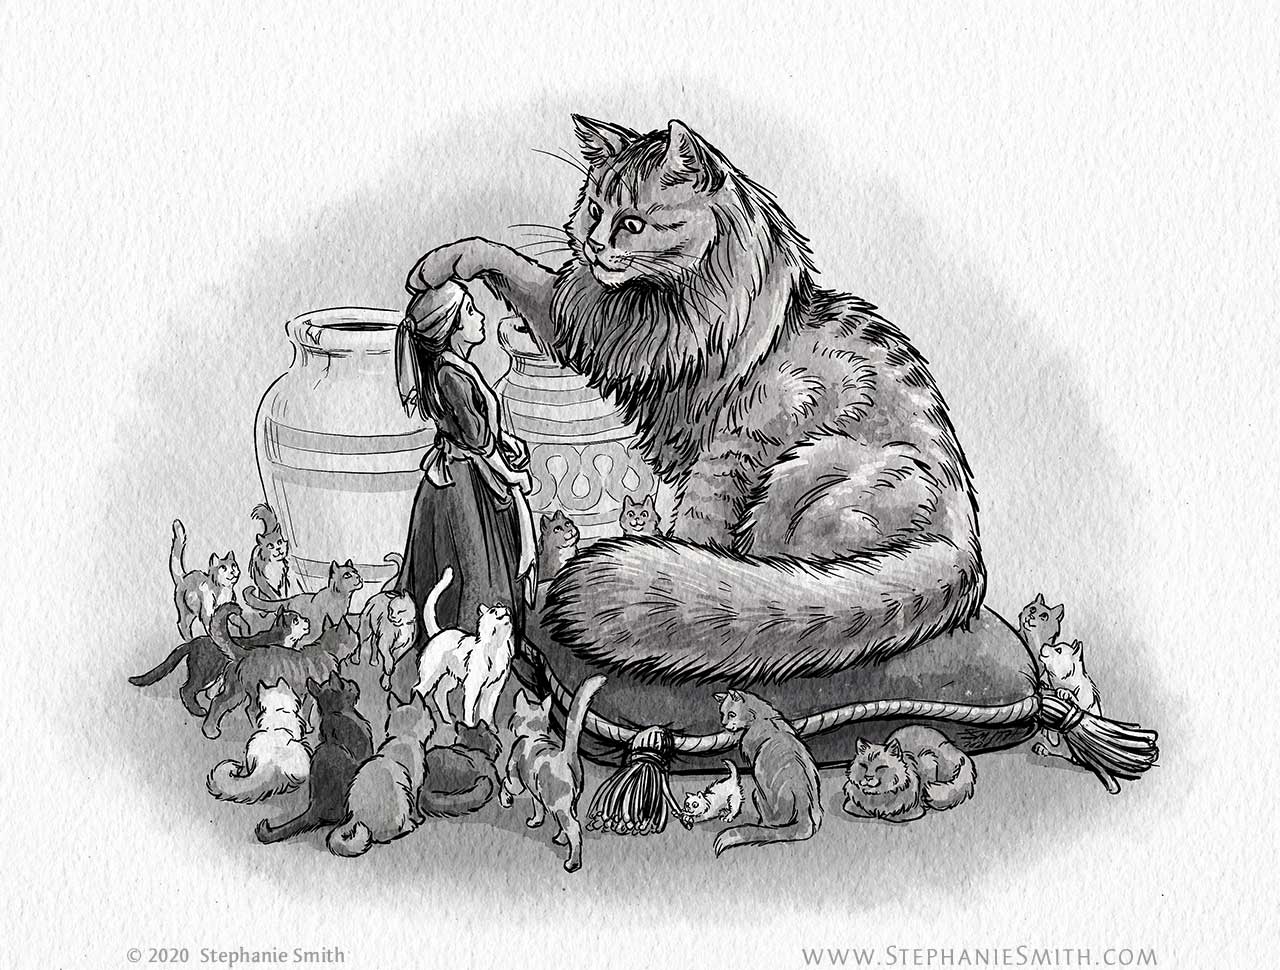 A drawing of a huge cat, surrounded by smaller cats, with its paw gently resting on a girls head.